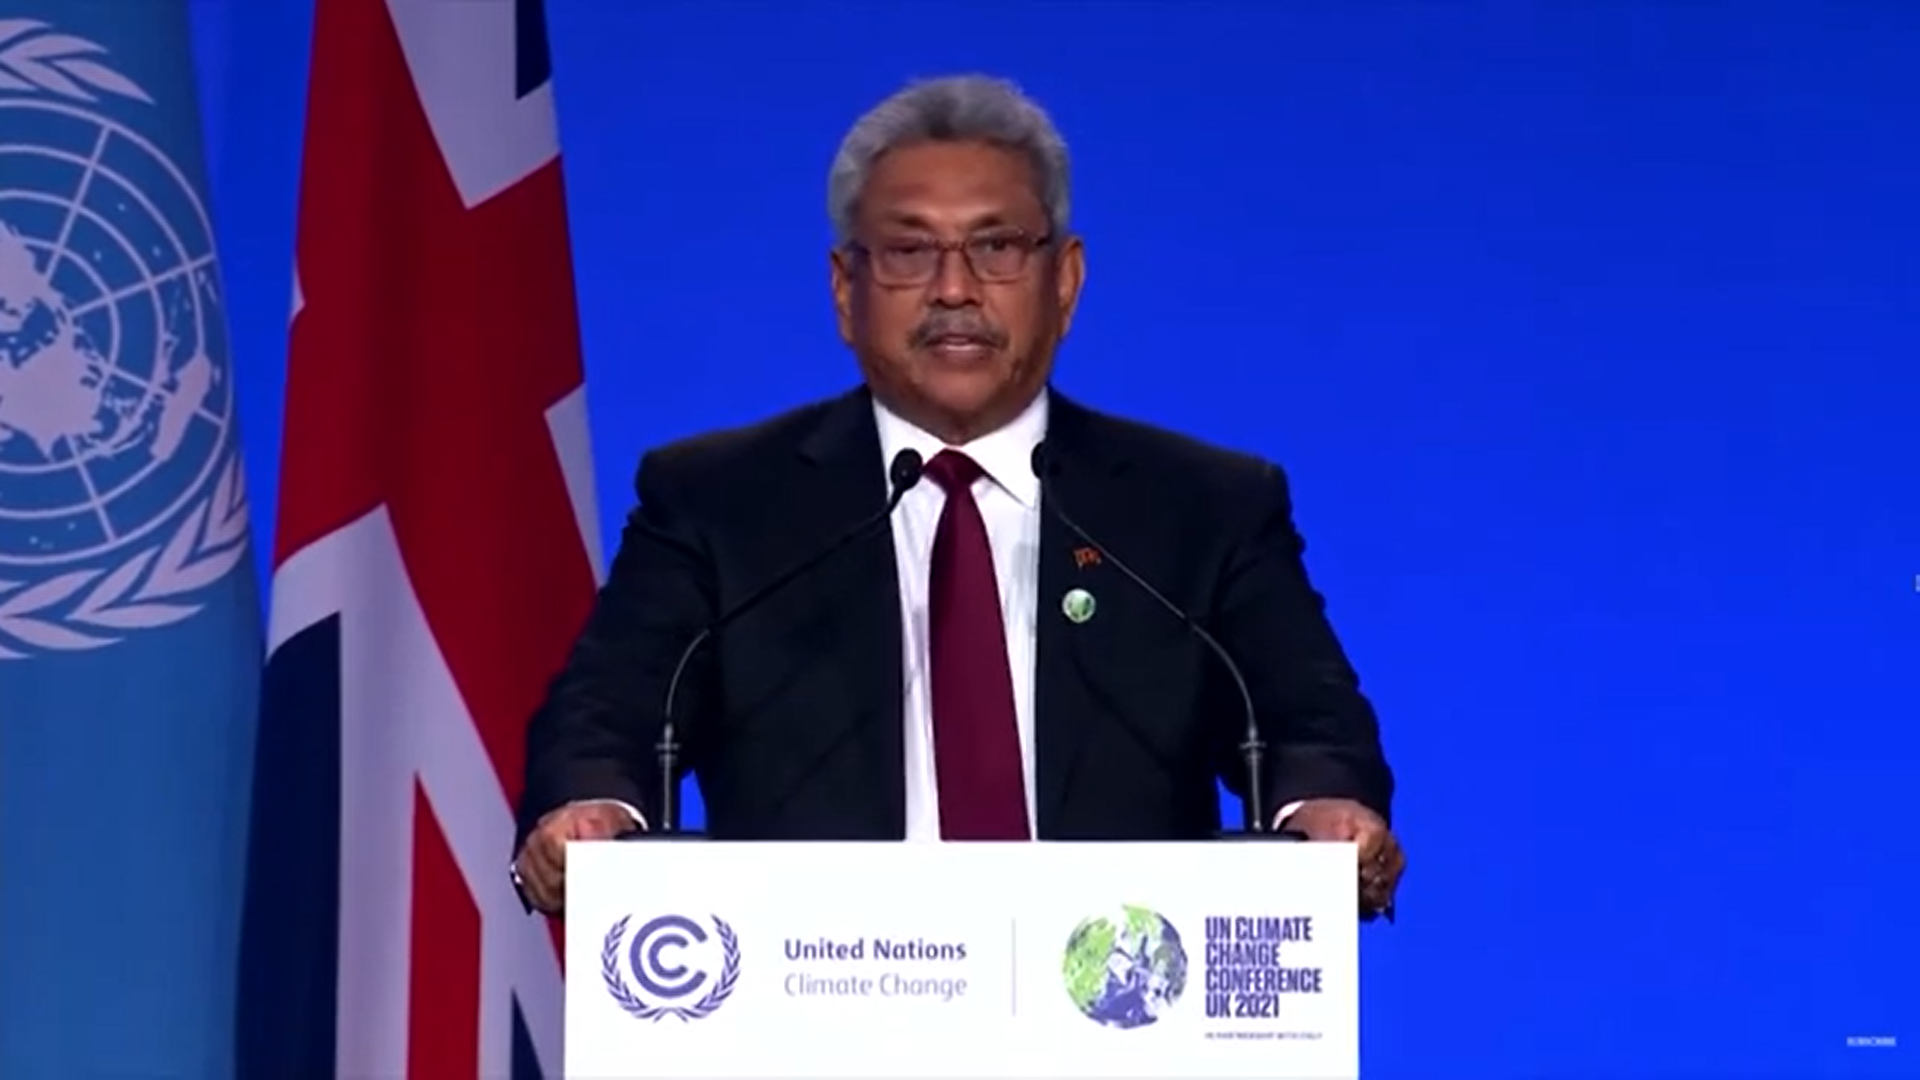 Speech by President Gotabaya Rajapaksa at the “ World Leaders Summit of COP26", UN Climate Change Conference, Scotland, UK | 01 November 2021